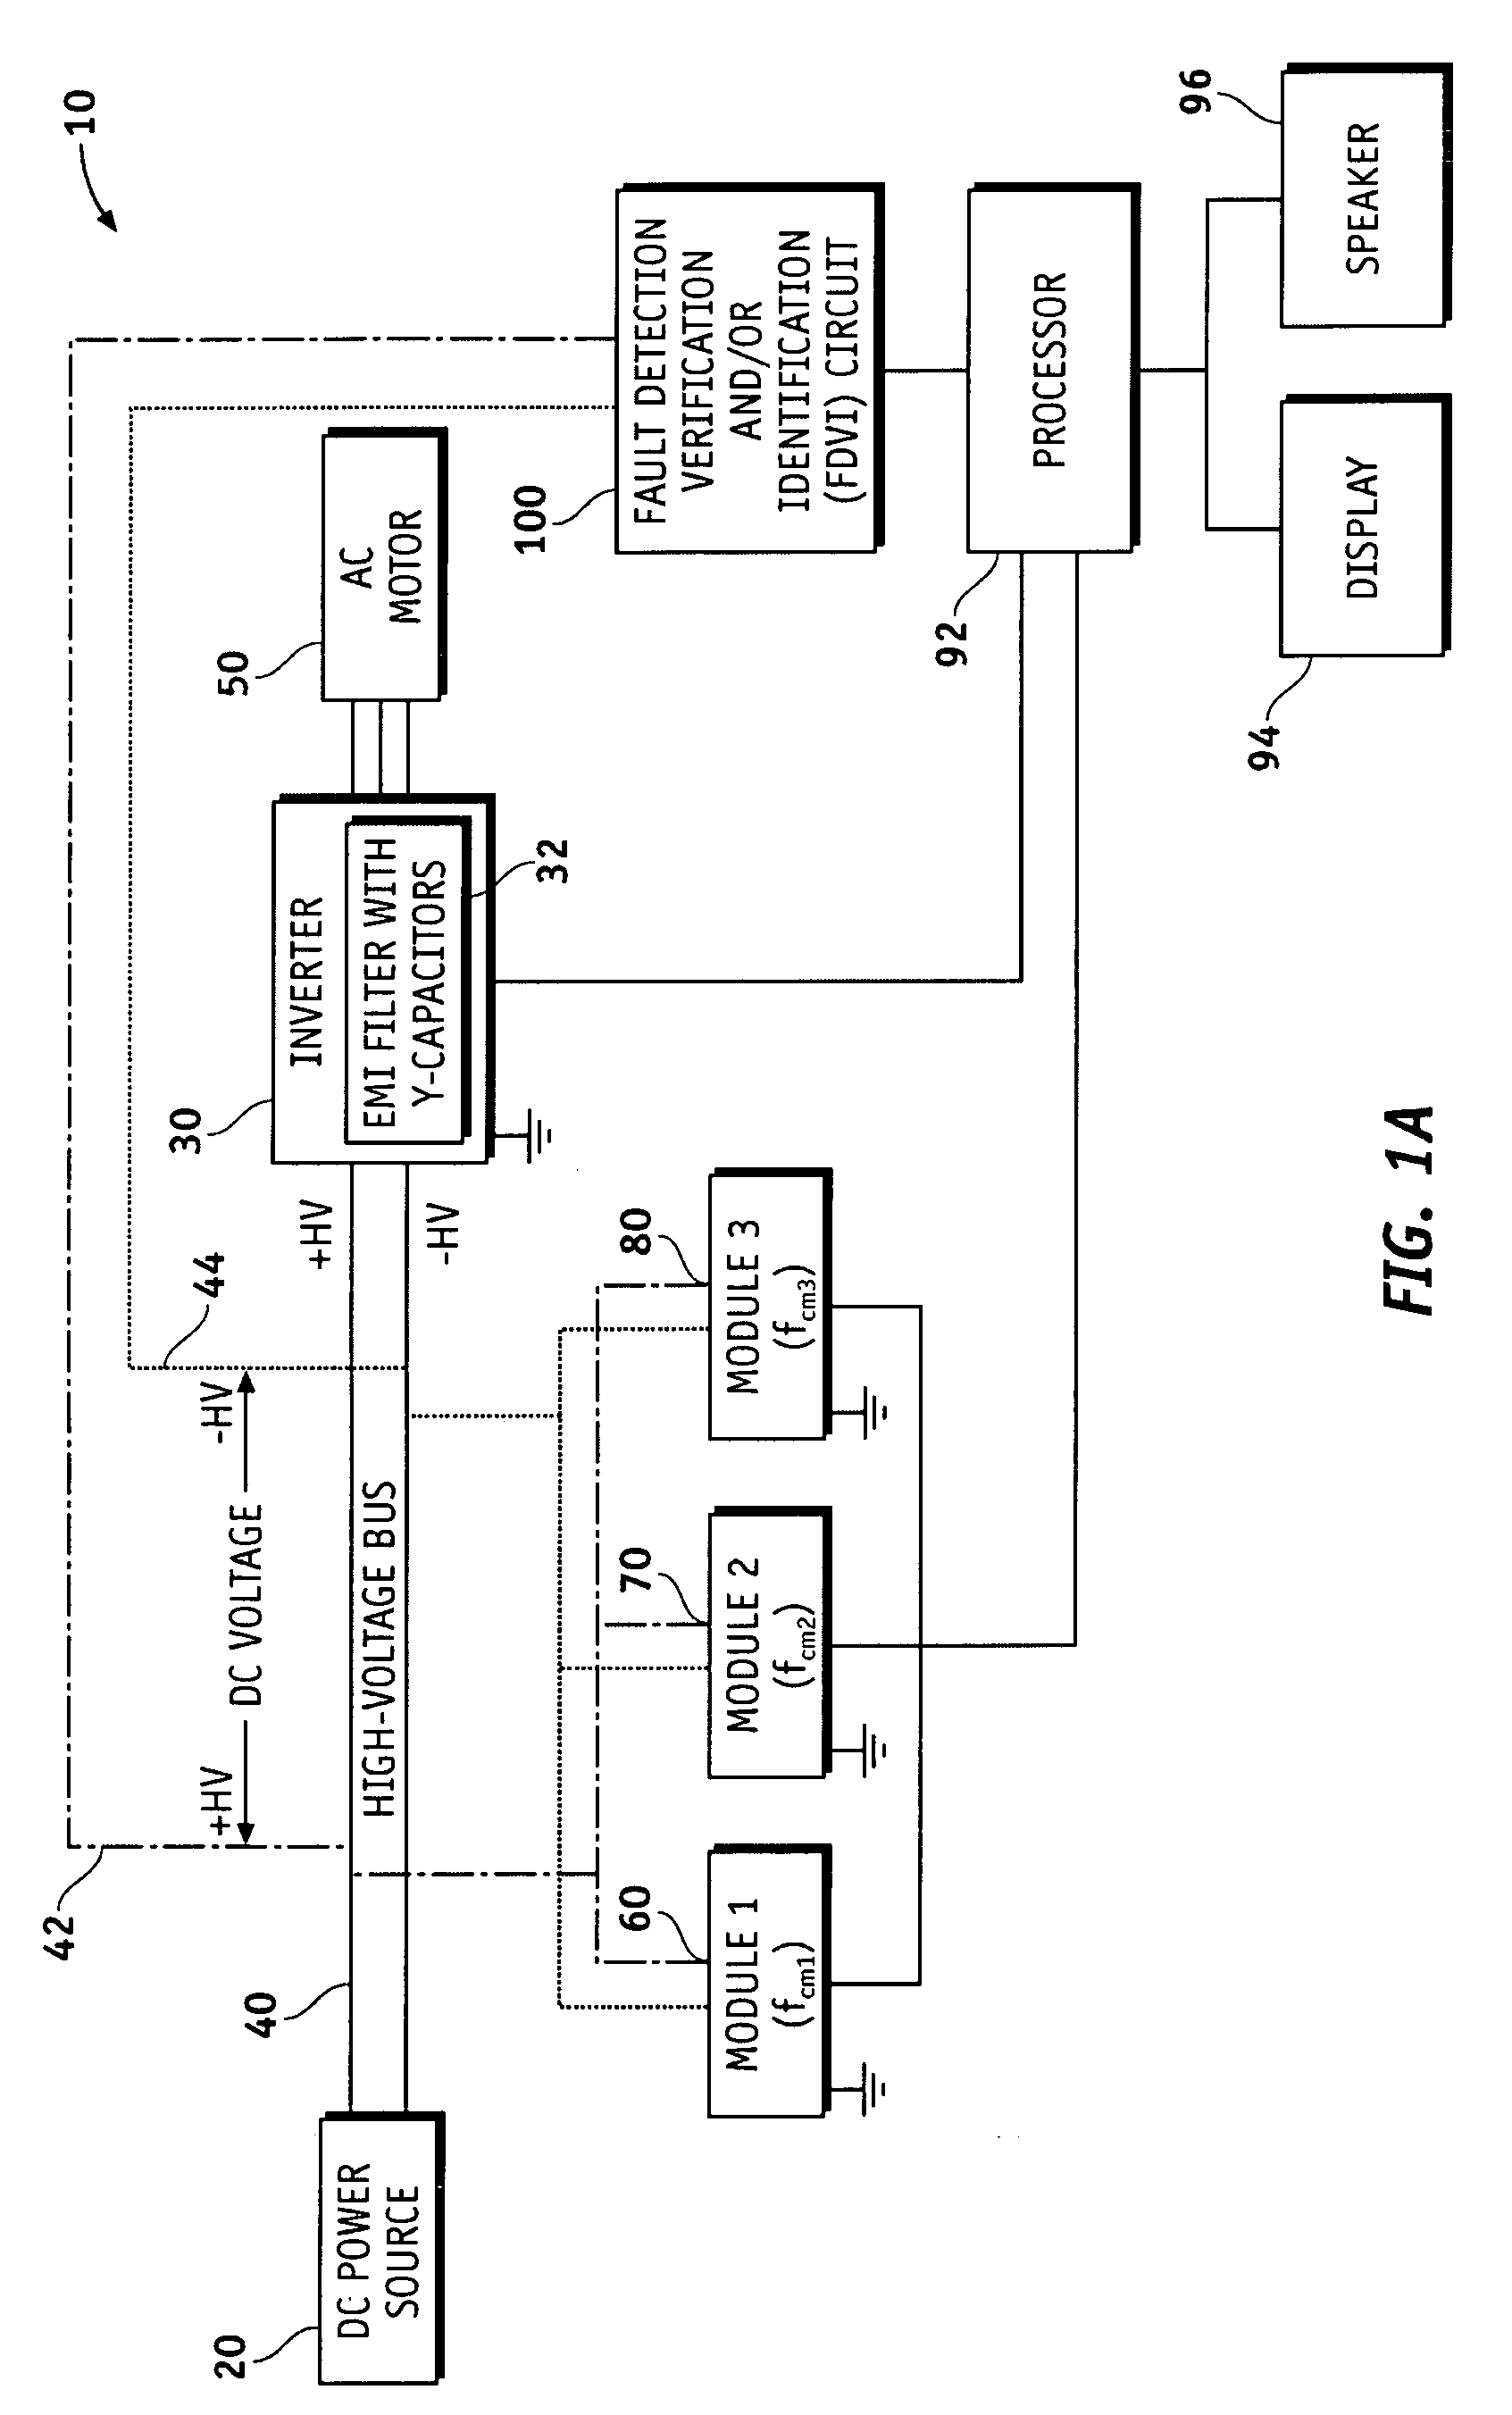 Apparatus and systems for common mode voltage-based ac fault detection, verification and/or identification